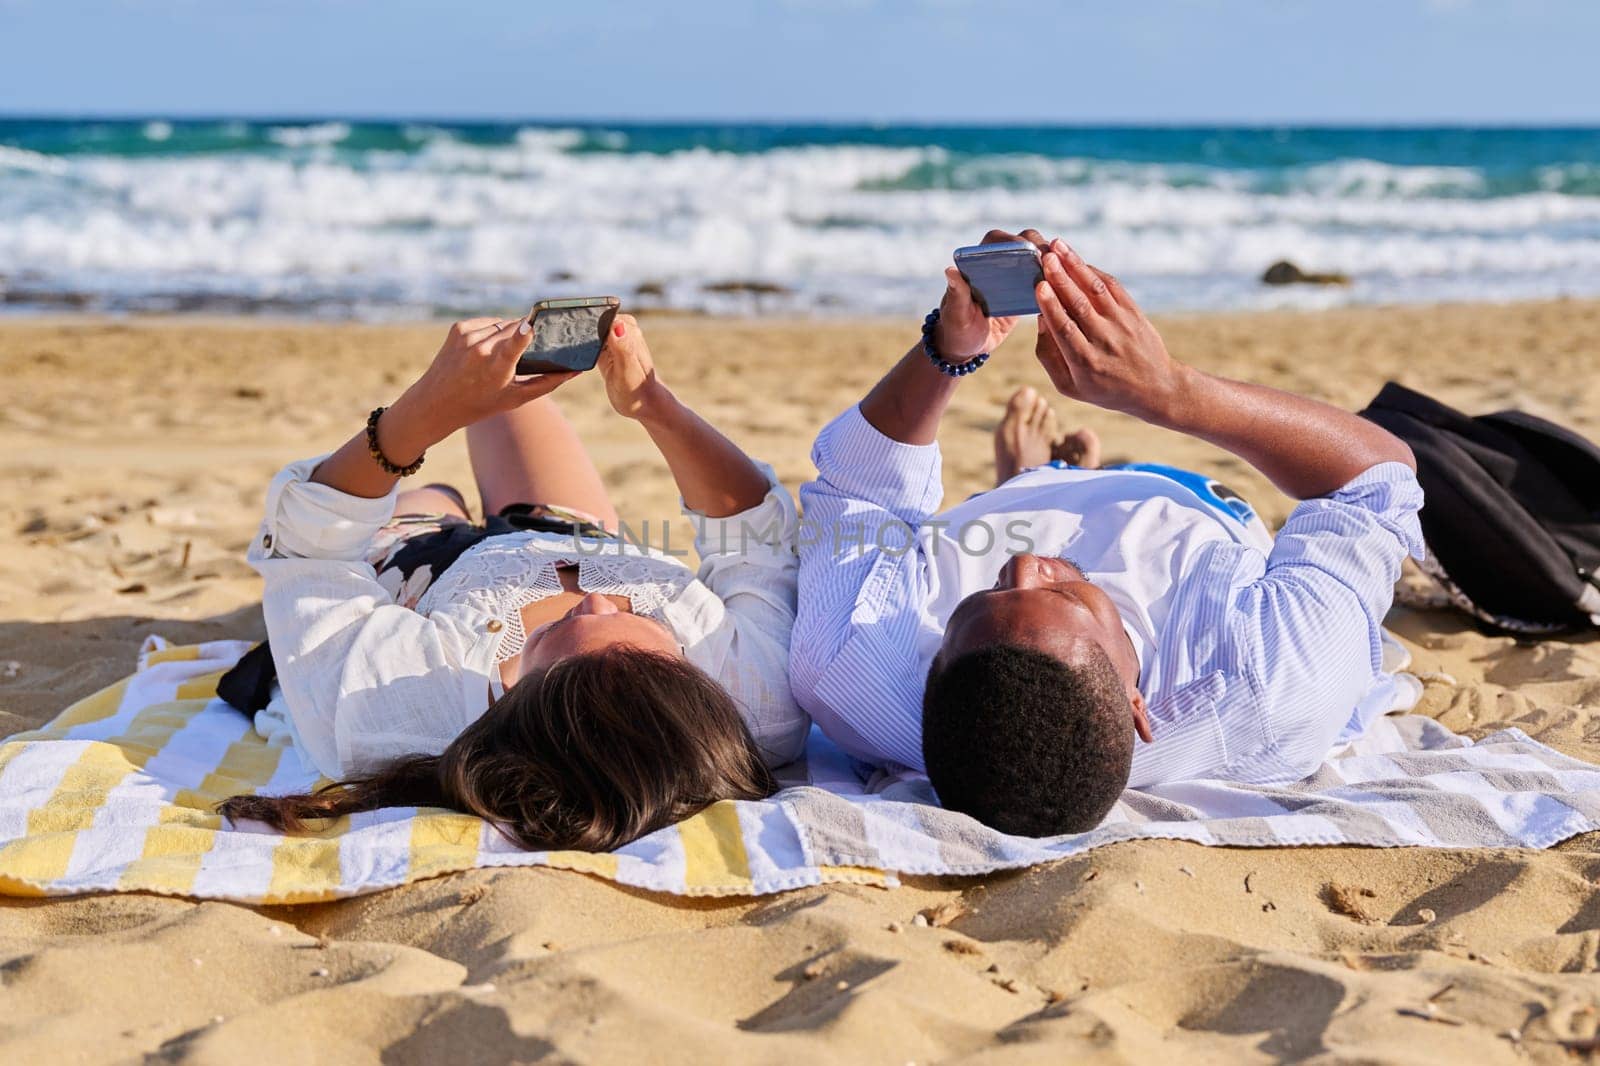 Young multicultural couple lying on beach using smartphones. Relaxing tourists lying on beach towels looking at smartphones. Lifestyle, technology, tourism, travel, nature, leisure, people concept